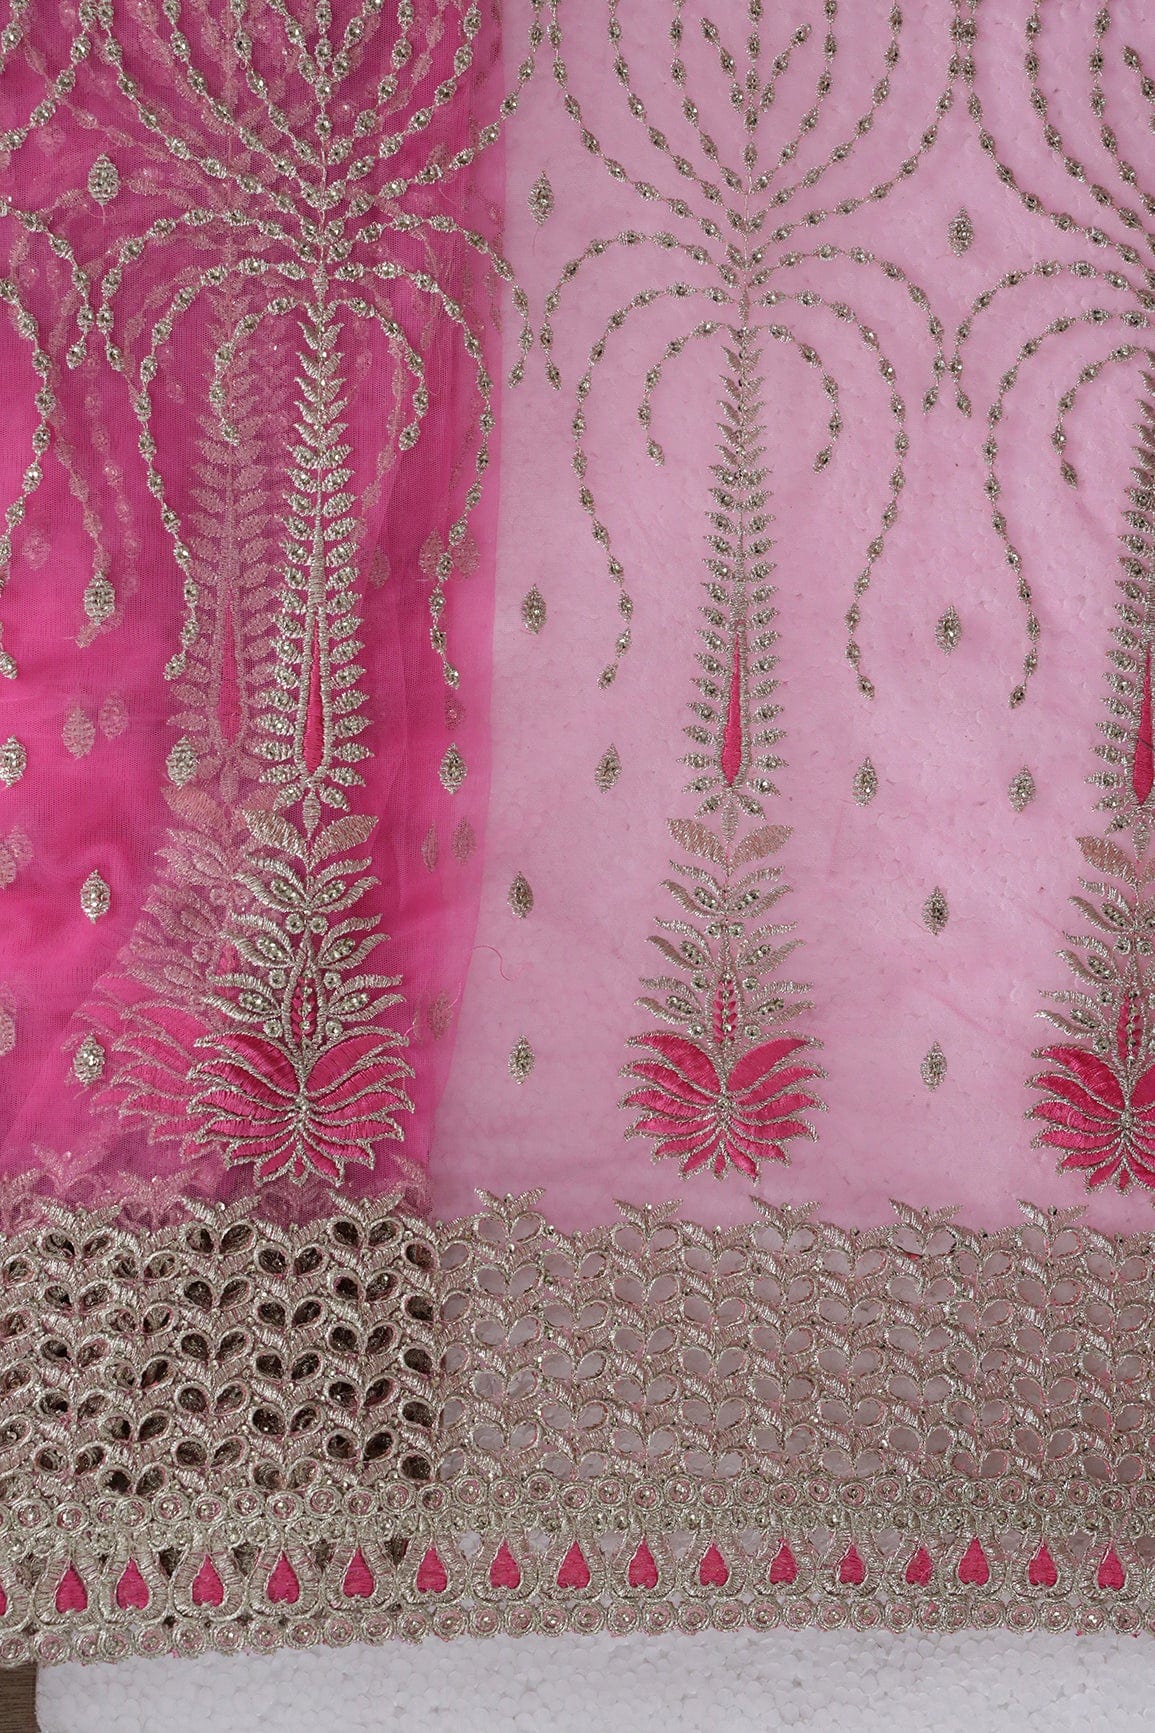 doeraa Embroidery Fabrics Big Width''56'' Pink Thread With Zari Traditional Embroidery Work On Pink Soft Net Fabric With Border